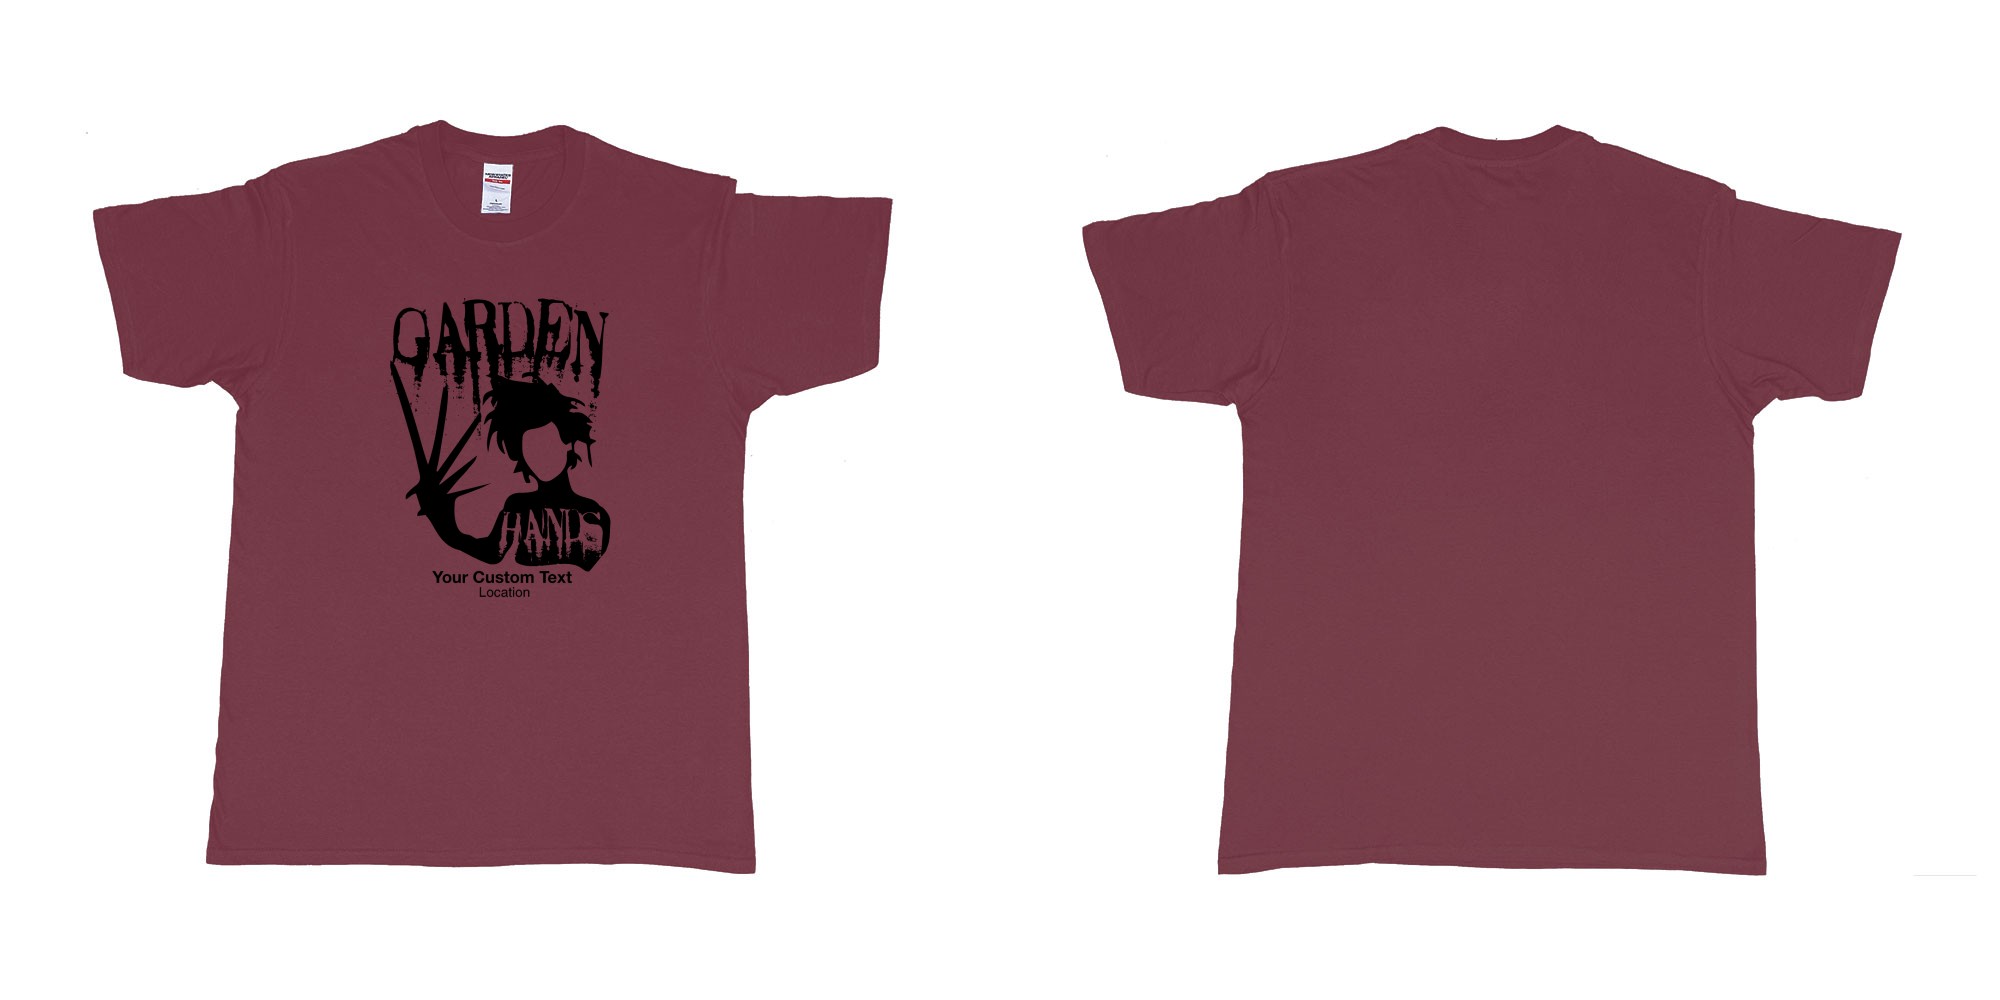 Custom tshirt design garden hands edward scissorhands custom design in fabric color marron choice your own text made in Bali by The Pirate Way